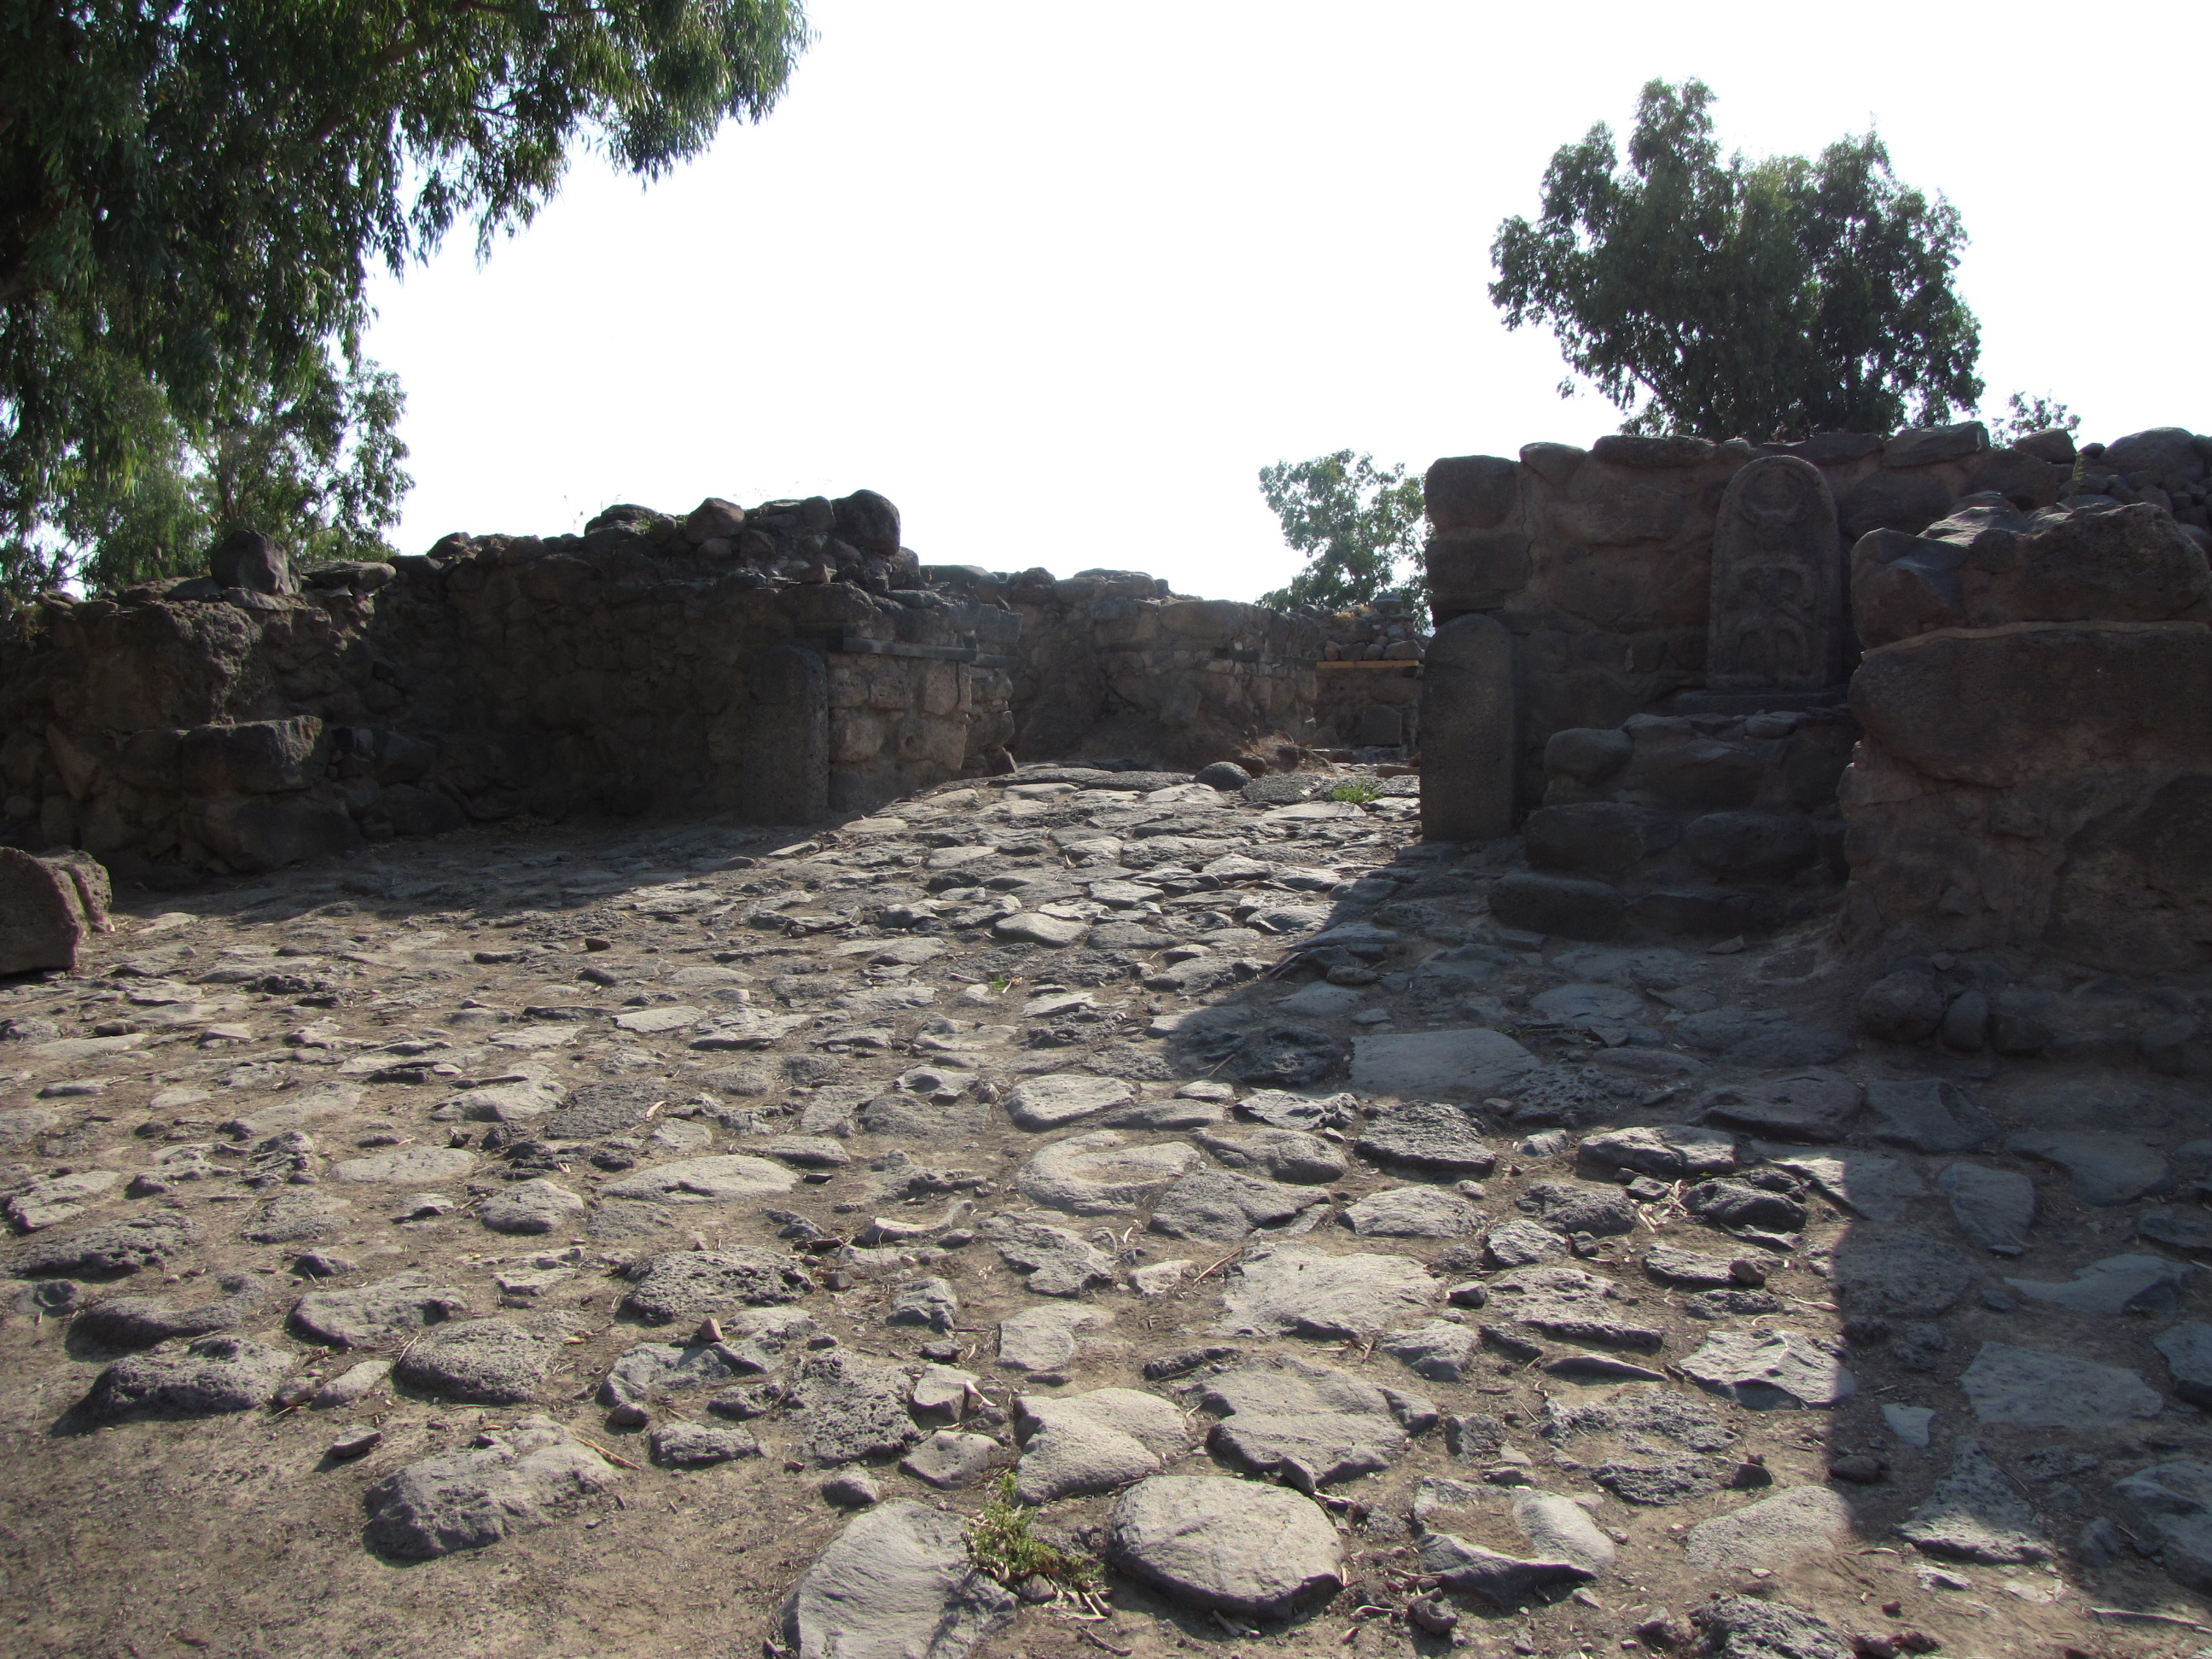 Geshur Four-Chamber Gate from 1000 BC